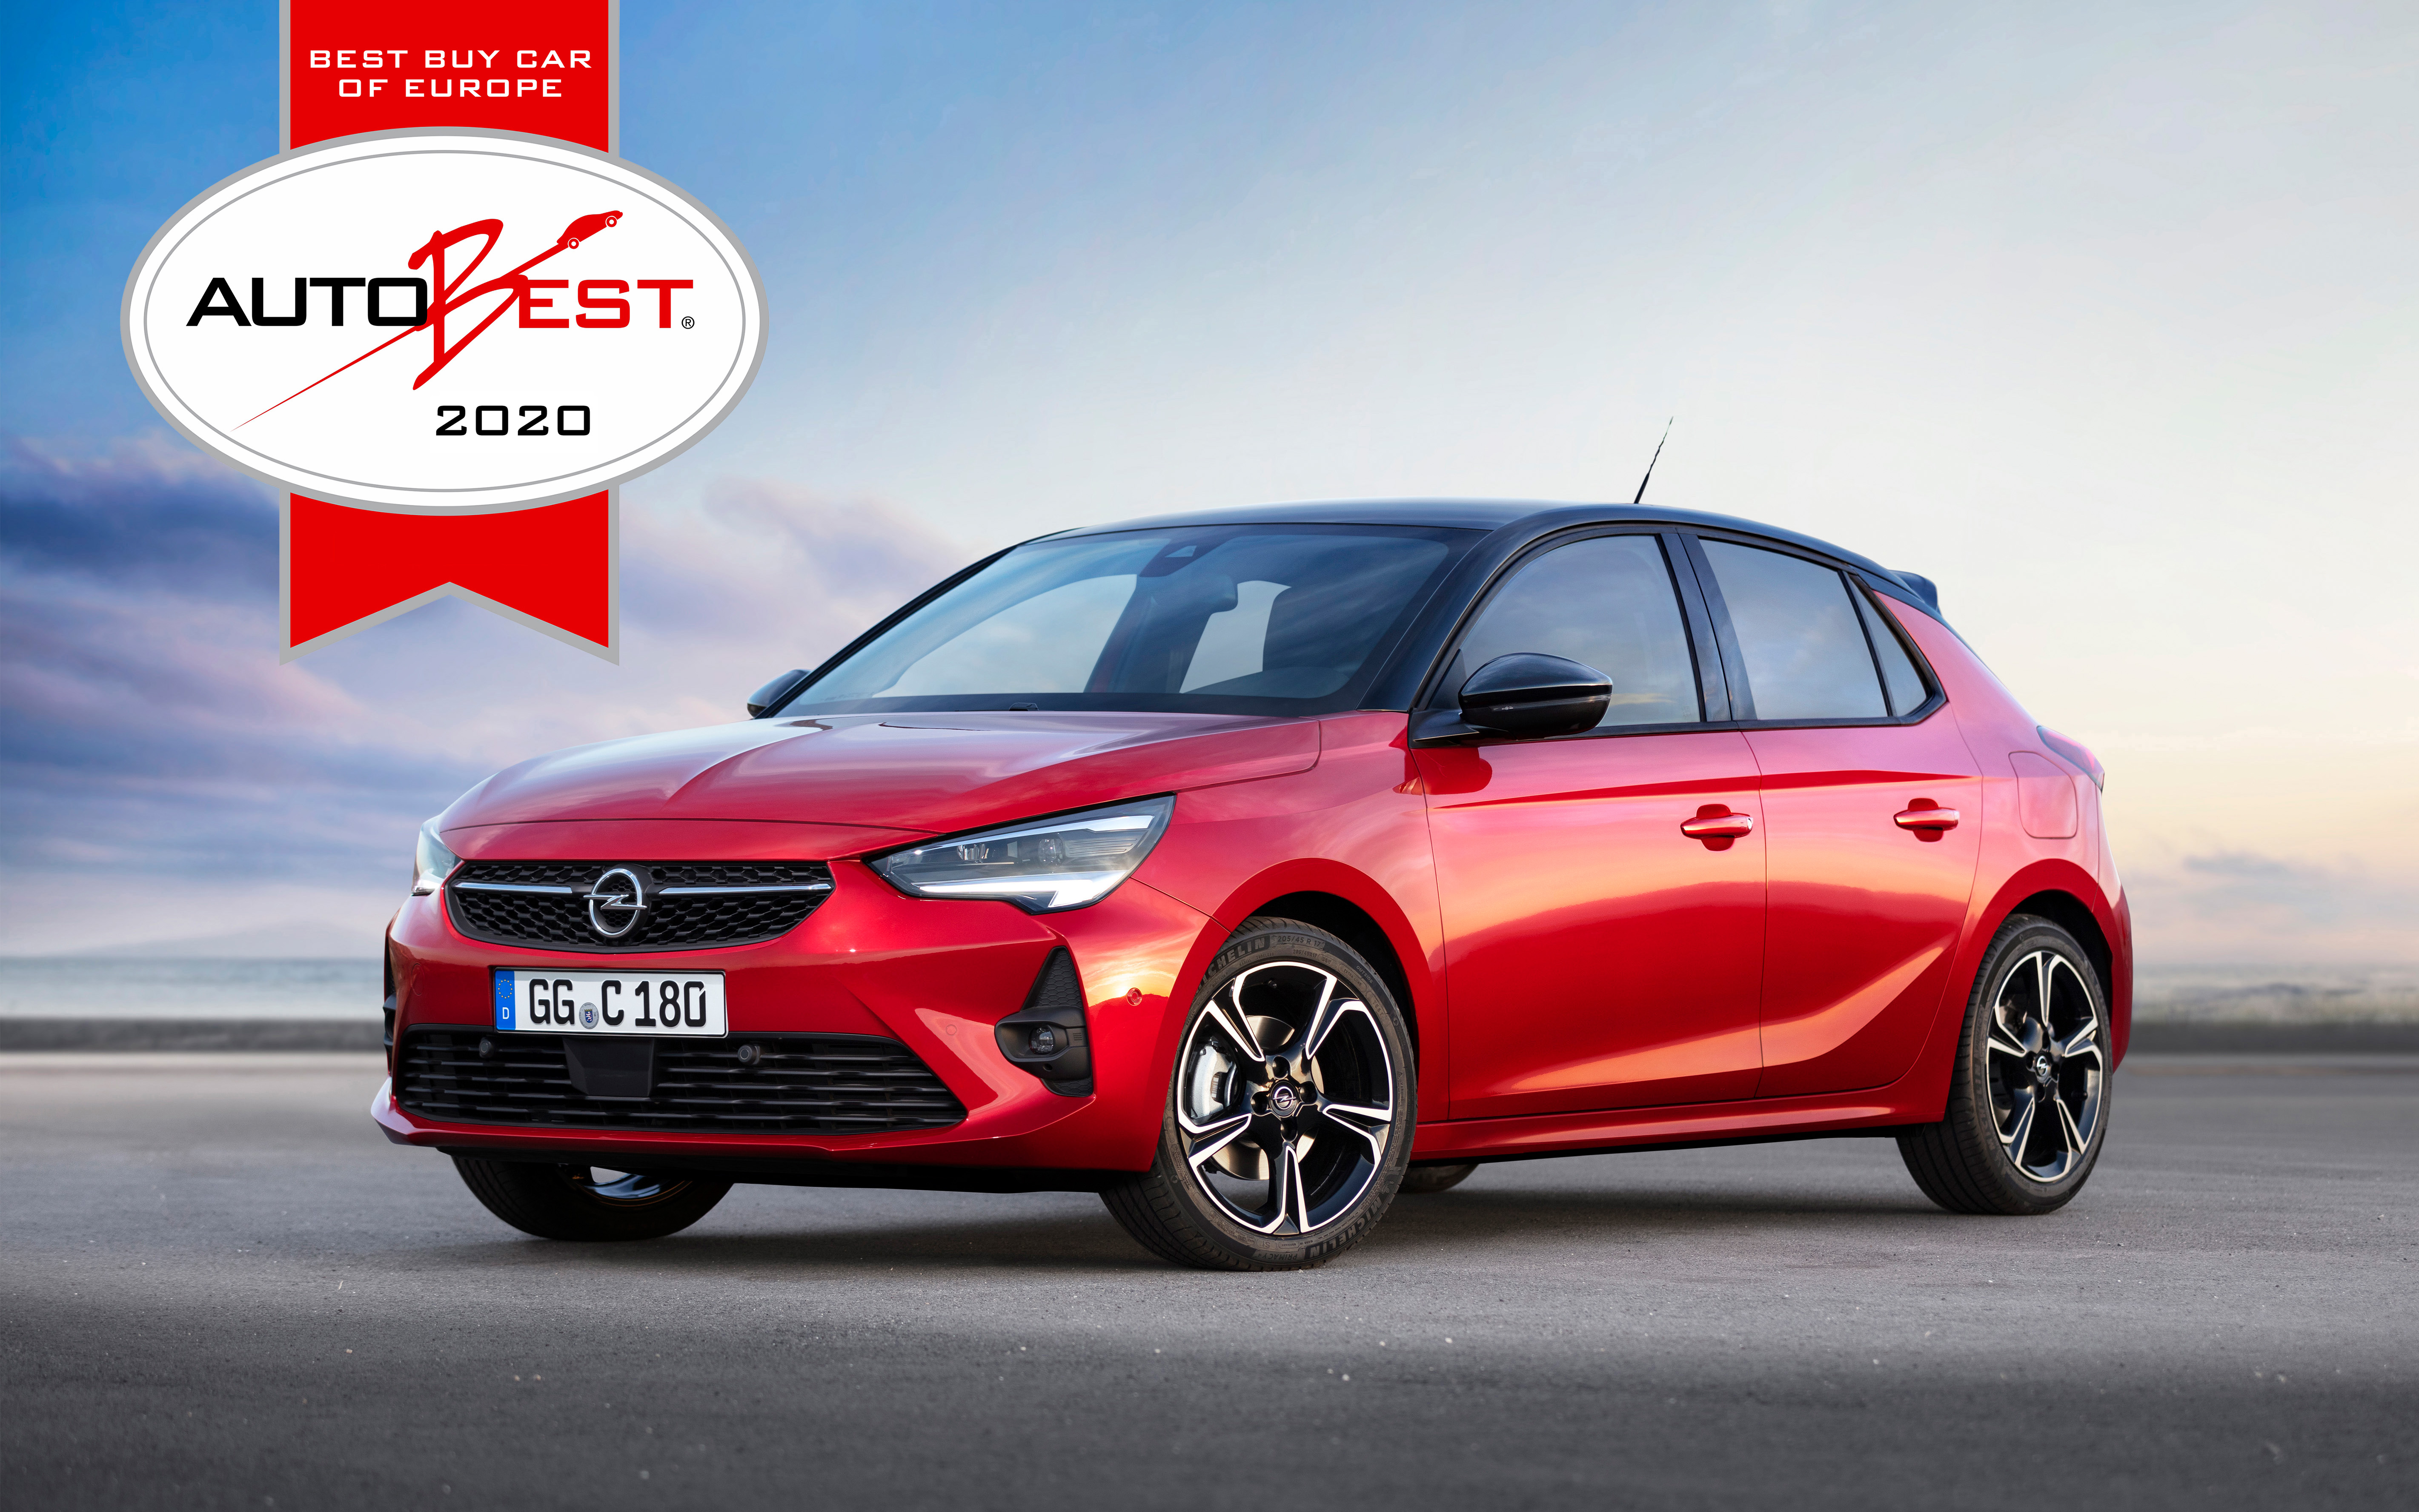 Best Buy Car Of Europe In New Opel Corsa And Corsa E Win Autobest Award Opel Automobile Gmbh Pressemitteilung Lifepr